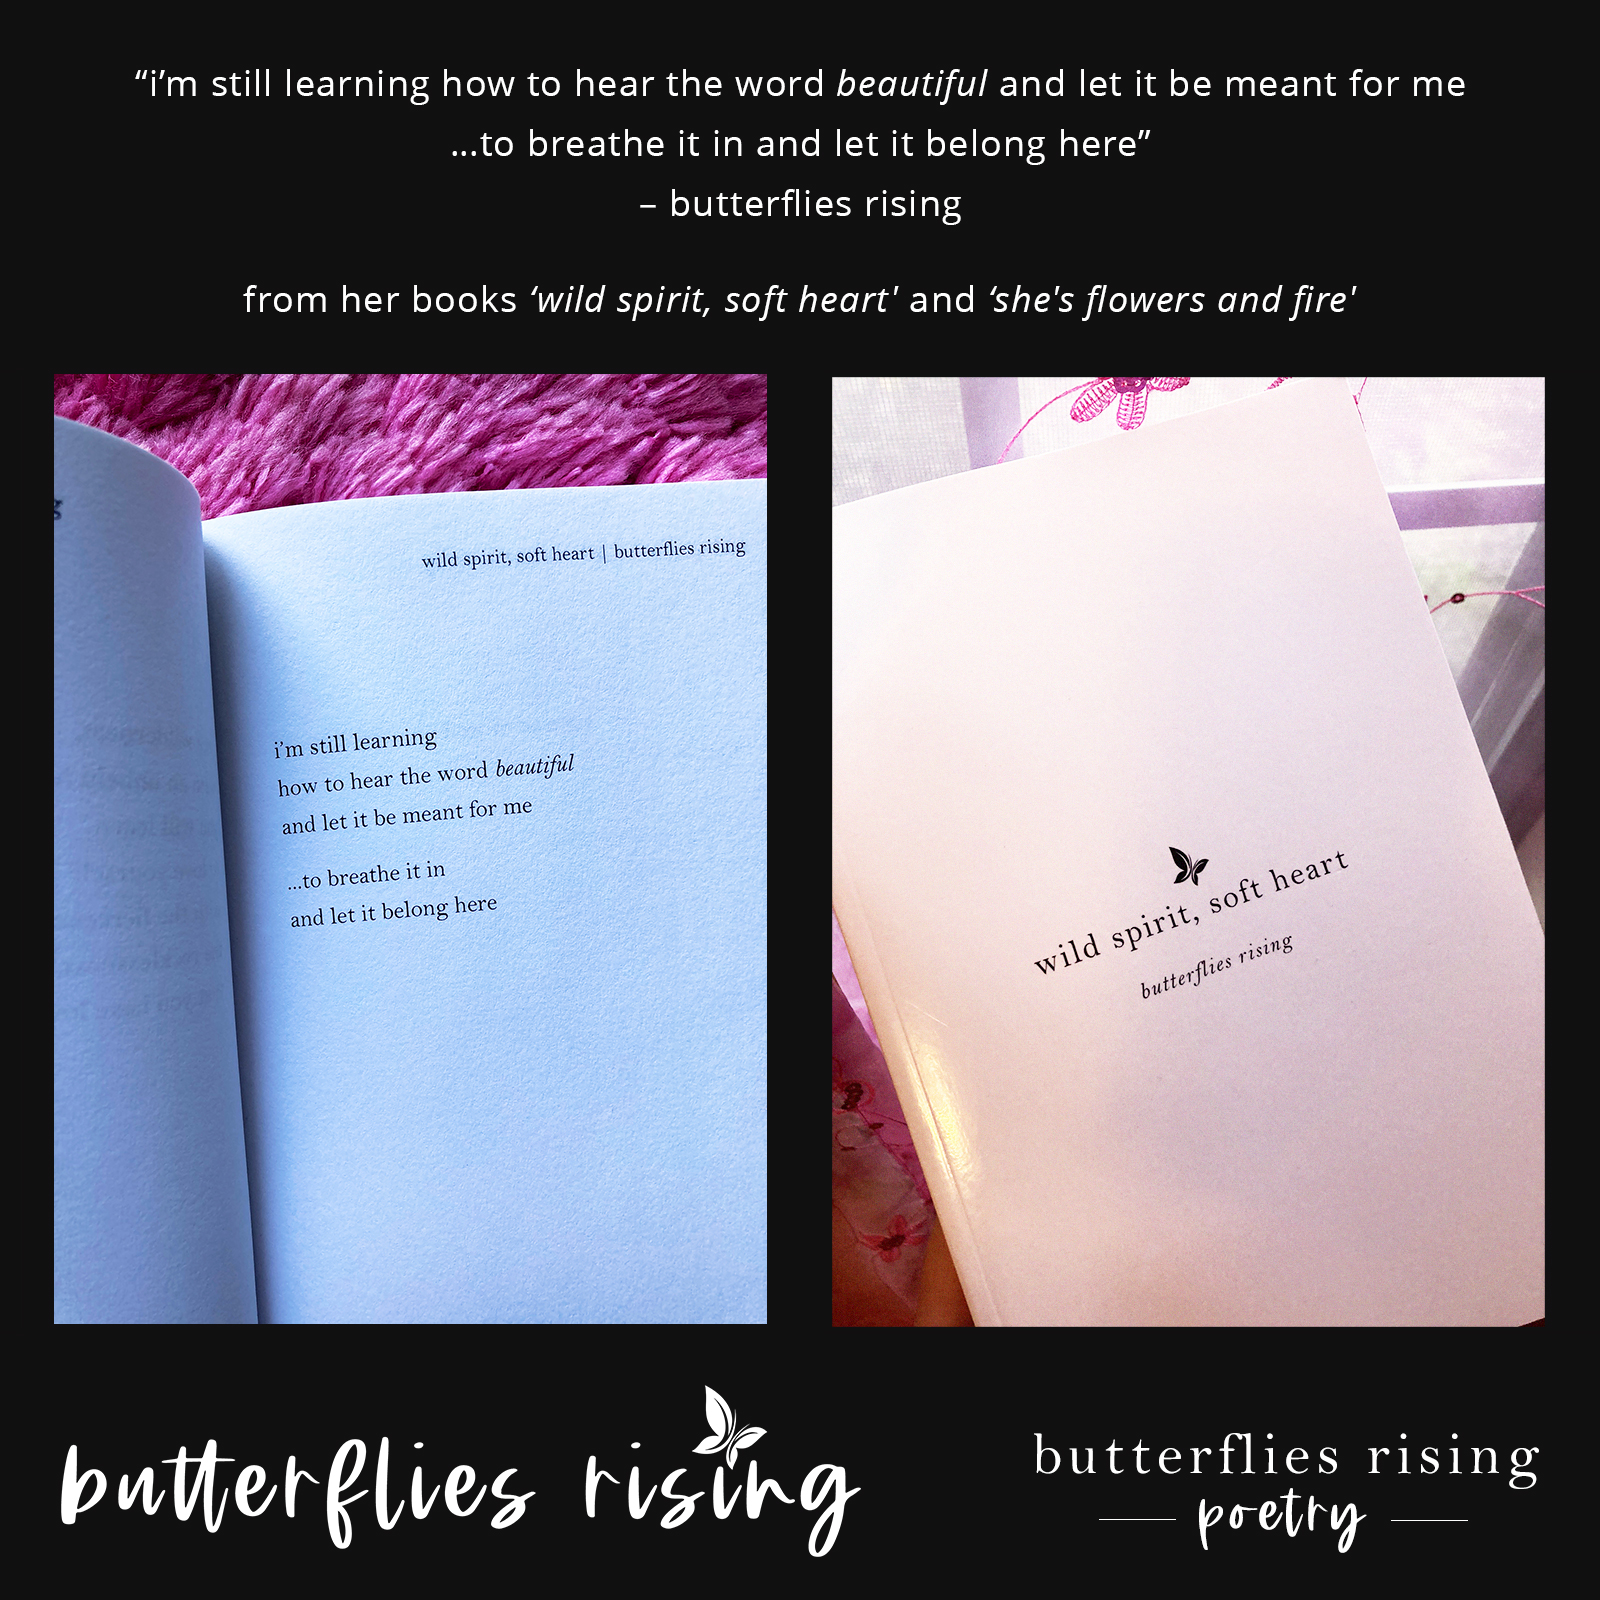 i’m still learning how to hear the word beautiful and let it be meant for me - butterflies rising